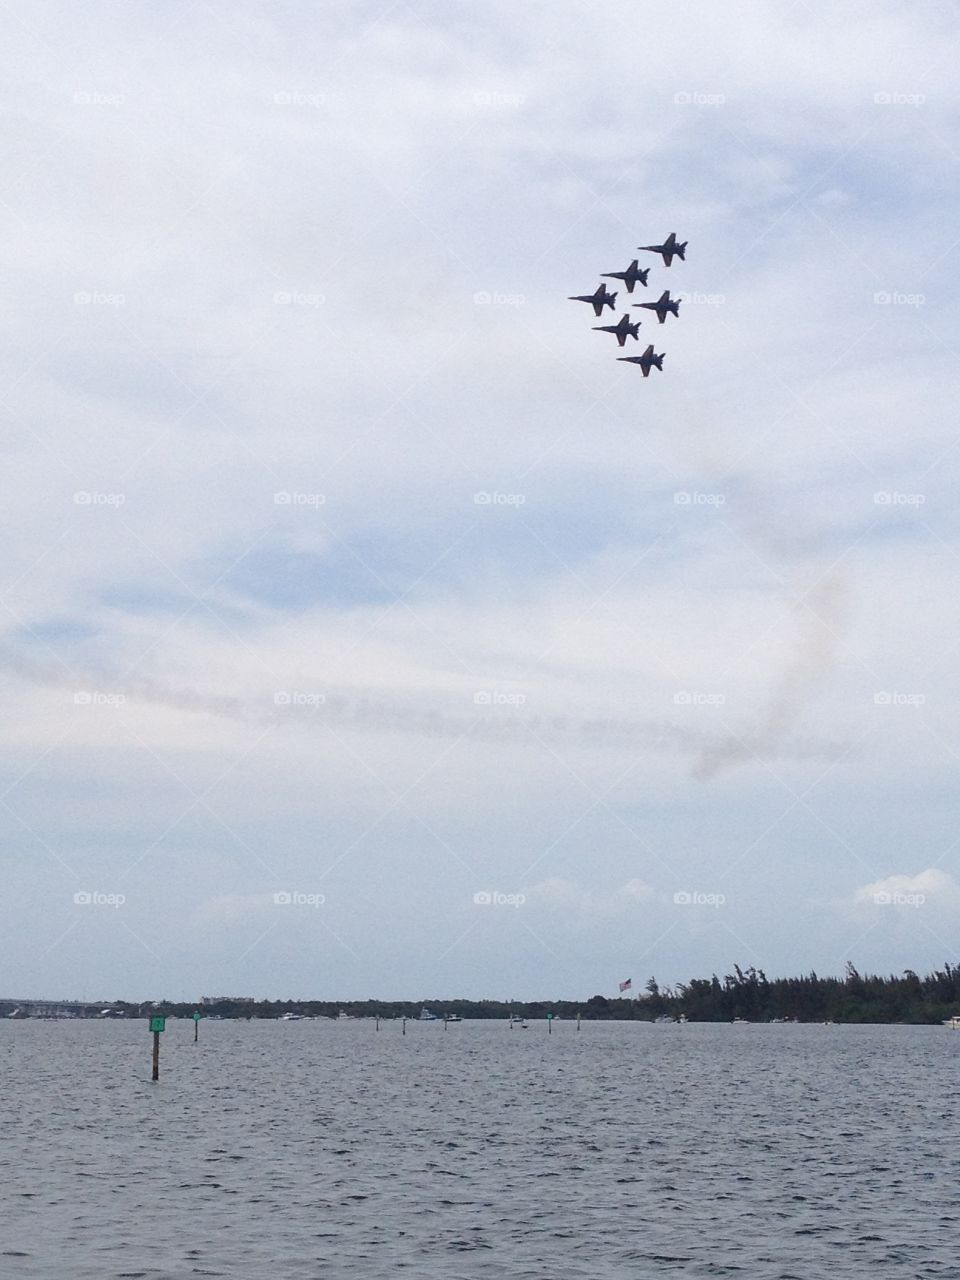 Blue Angels over the Lagoon